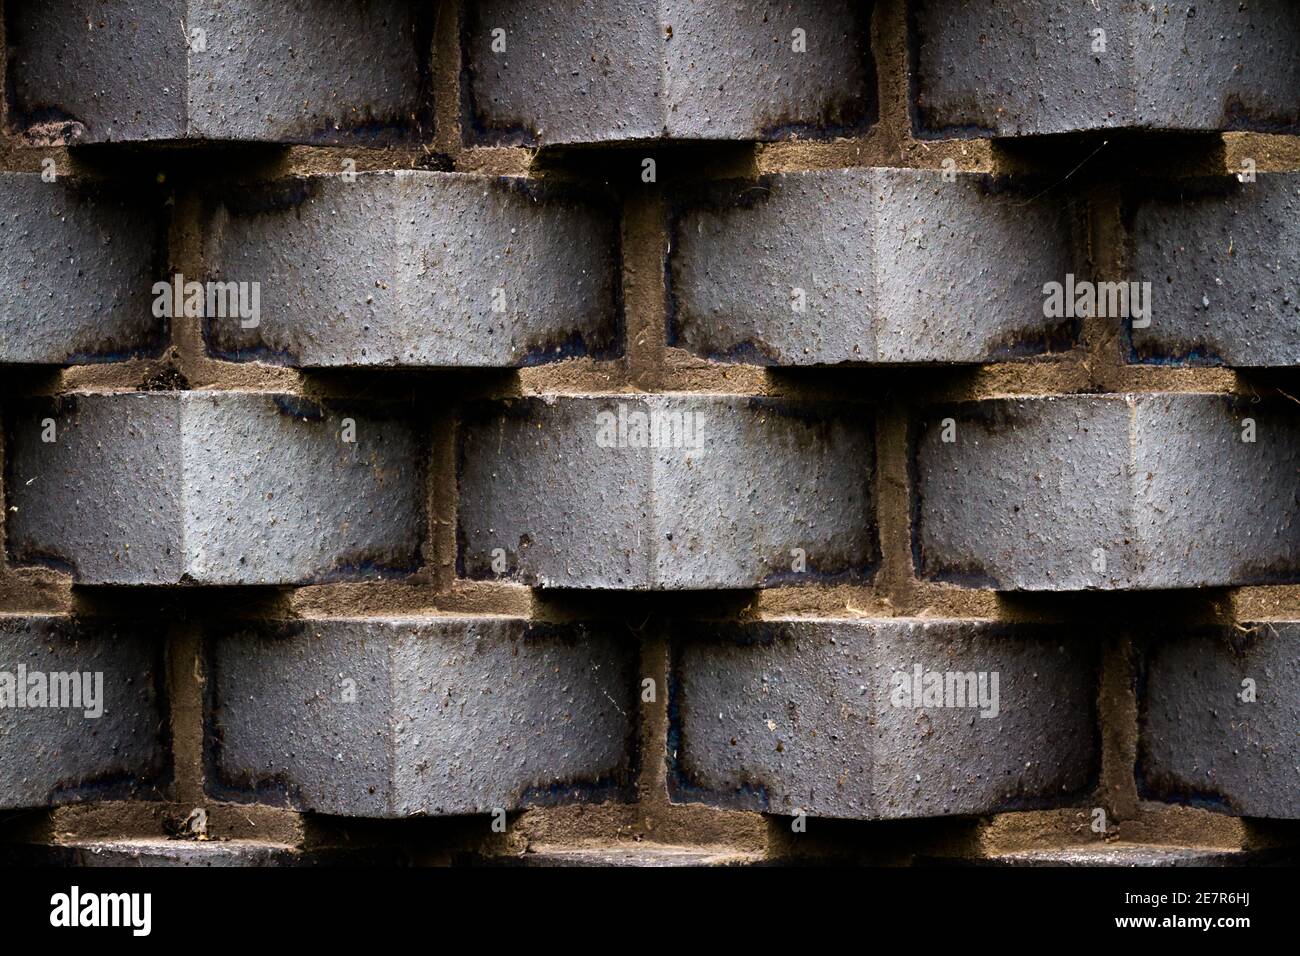 Dark bricks forming a wall set in an unusual angle Stock Photo